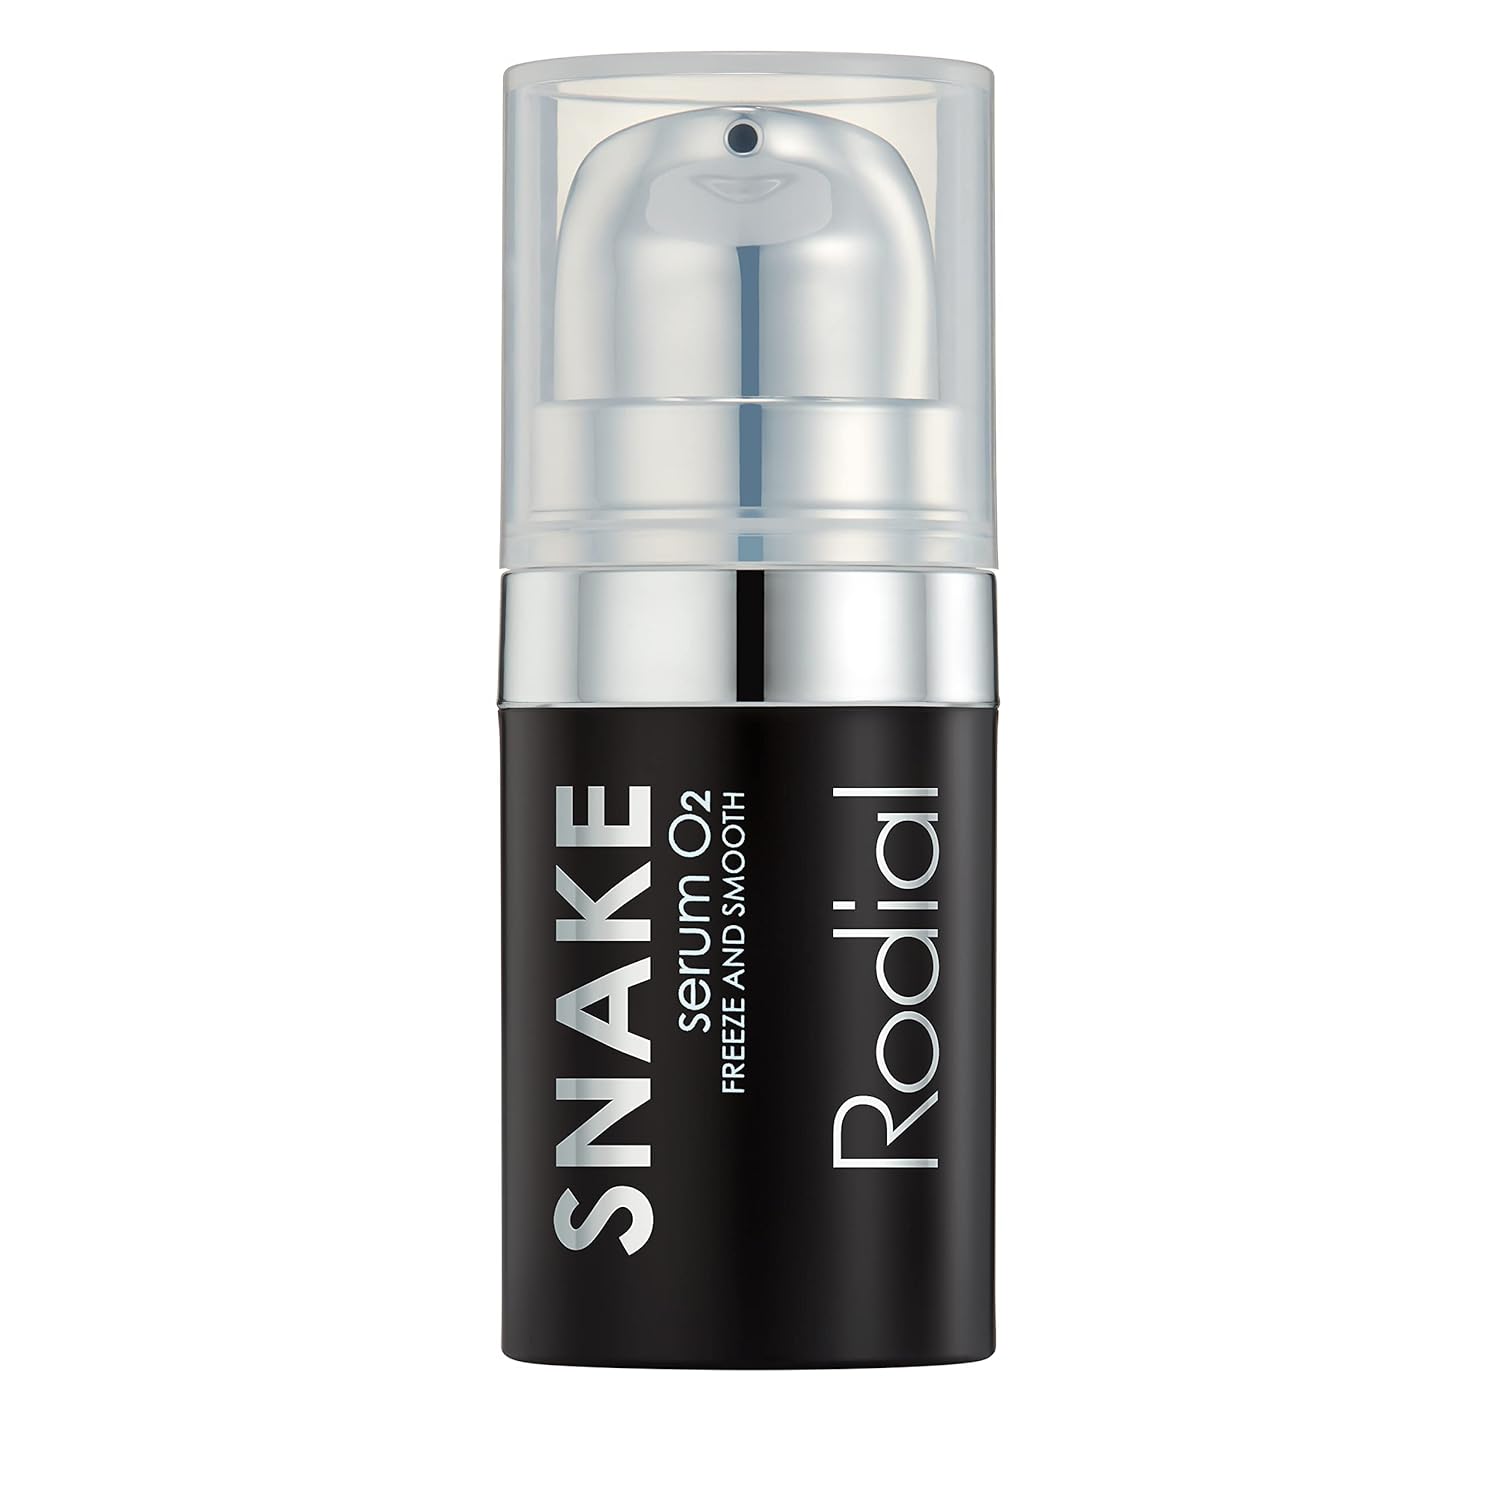 Rodial Snake Serum O2 0.2. High-Performance Serum with Blurring-Effect for Reducing Lines and Wrinkles, Syn-ake Tripeptide for Firming and Smoothing Effect, Hyaluronic Acid for Moisture Retaining